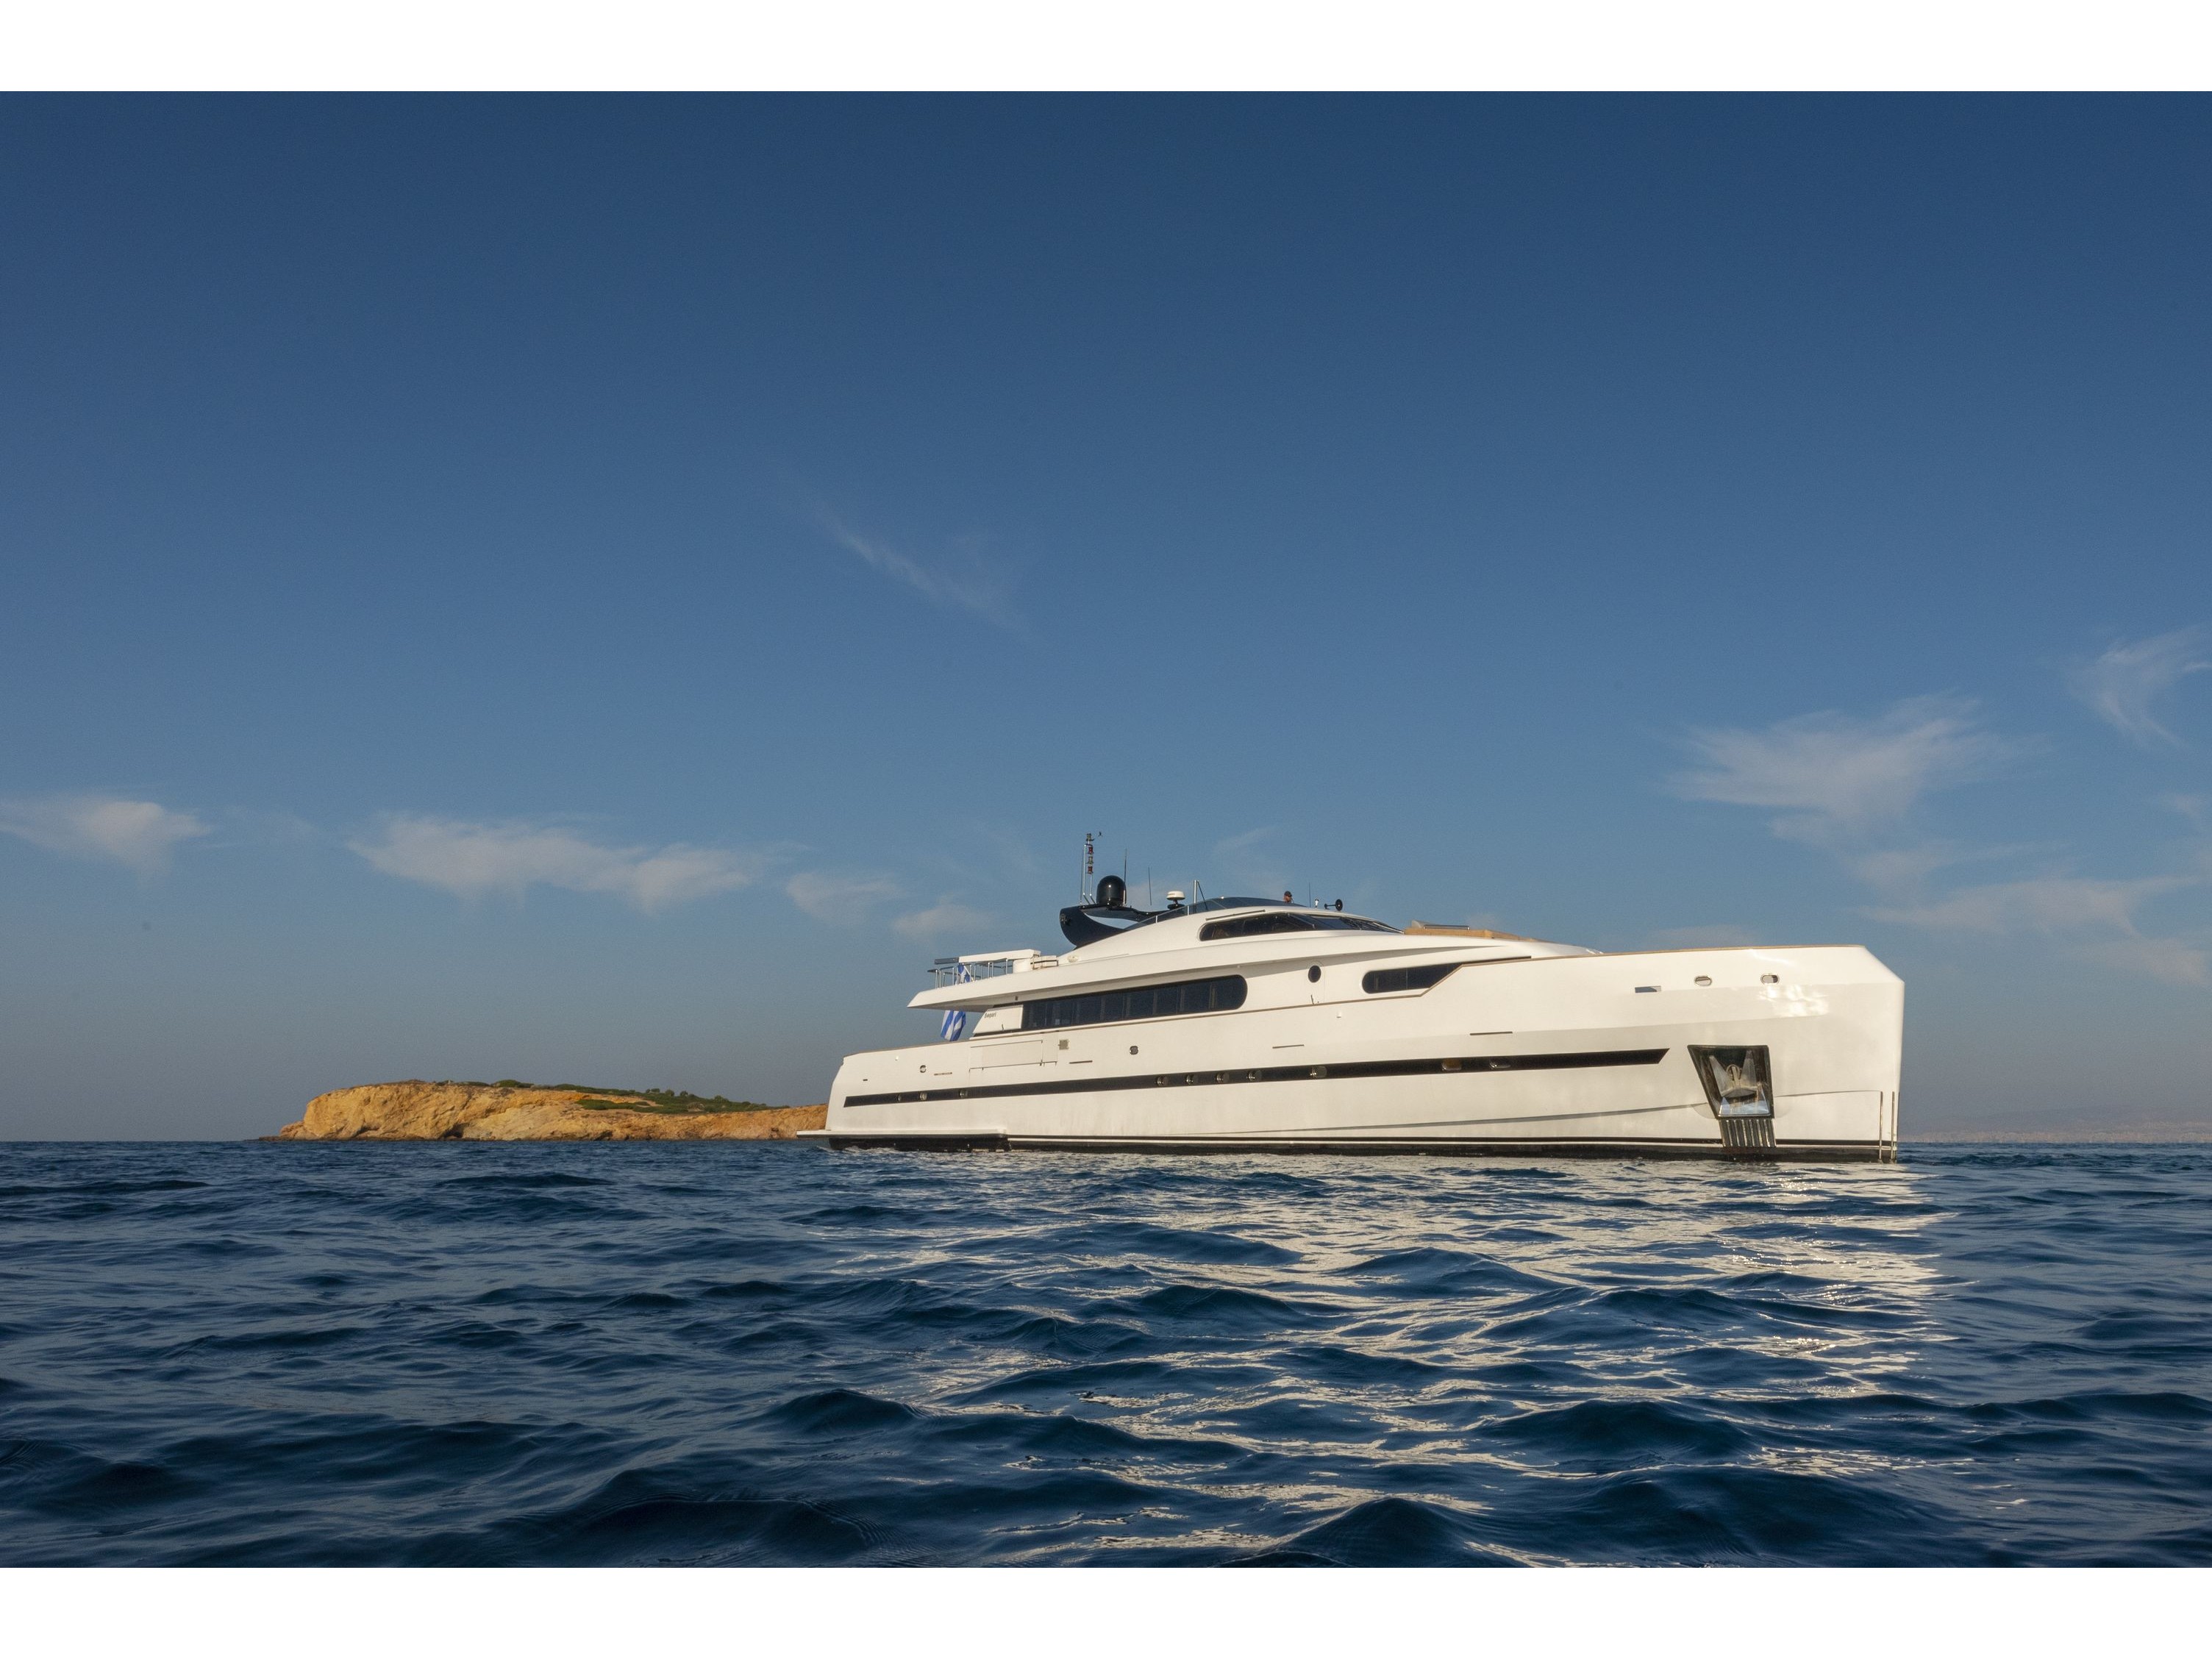 Motoryacht - Motor Boat Charter Greece & Boat hire in Greece Athens and Saronic Gulf Athens Piraeus Athens Marina S.A. 1